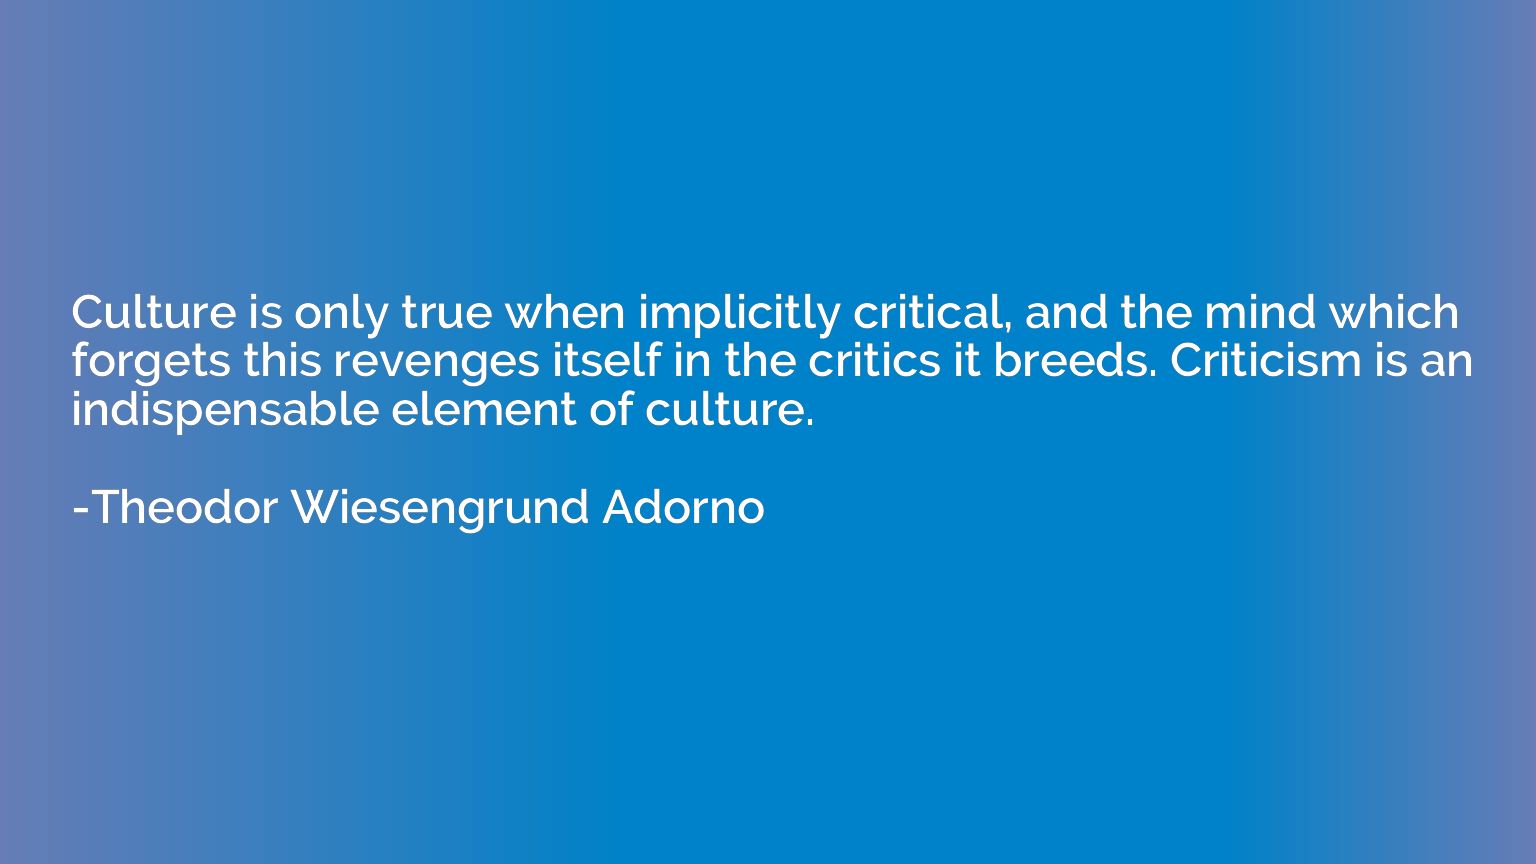 Culture is only true when implicitly critical, and the mind 